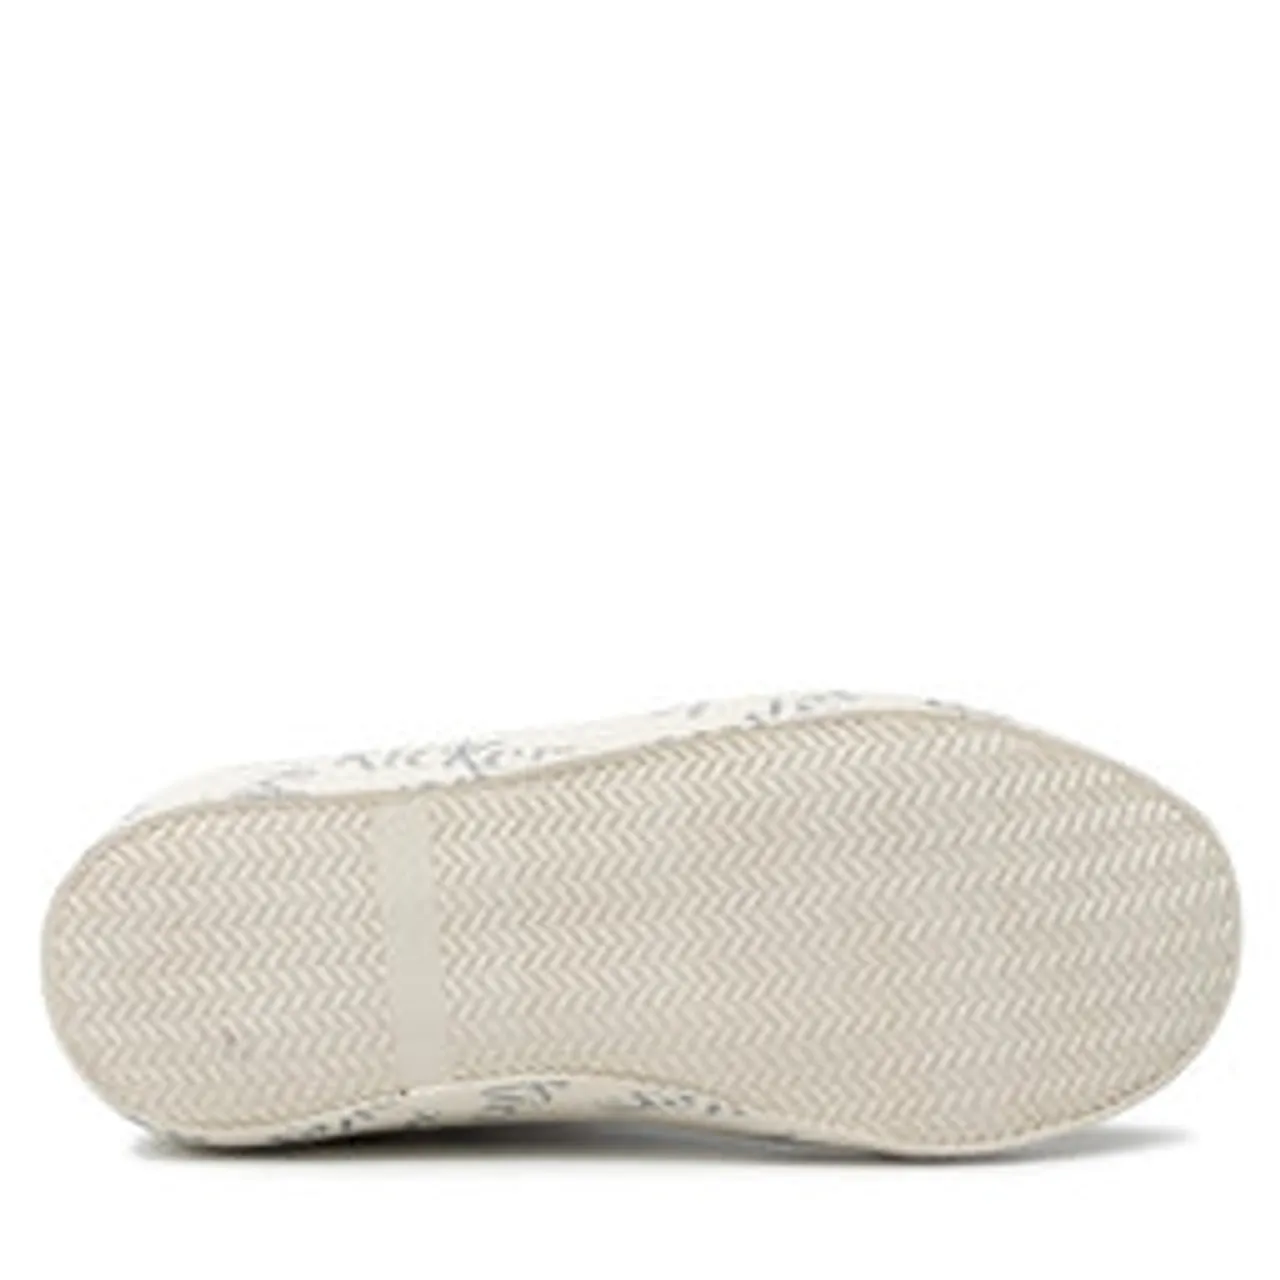 Sneakers aus Stoff Kickers Godup 858435-30 S Blanc Pois Multico 33